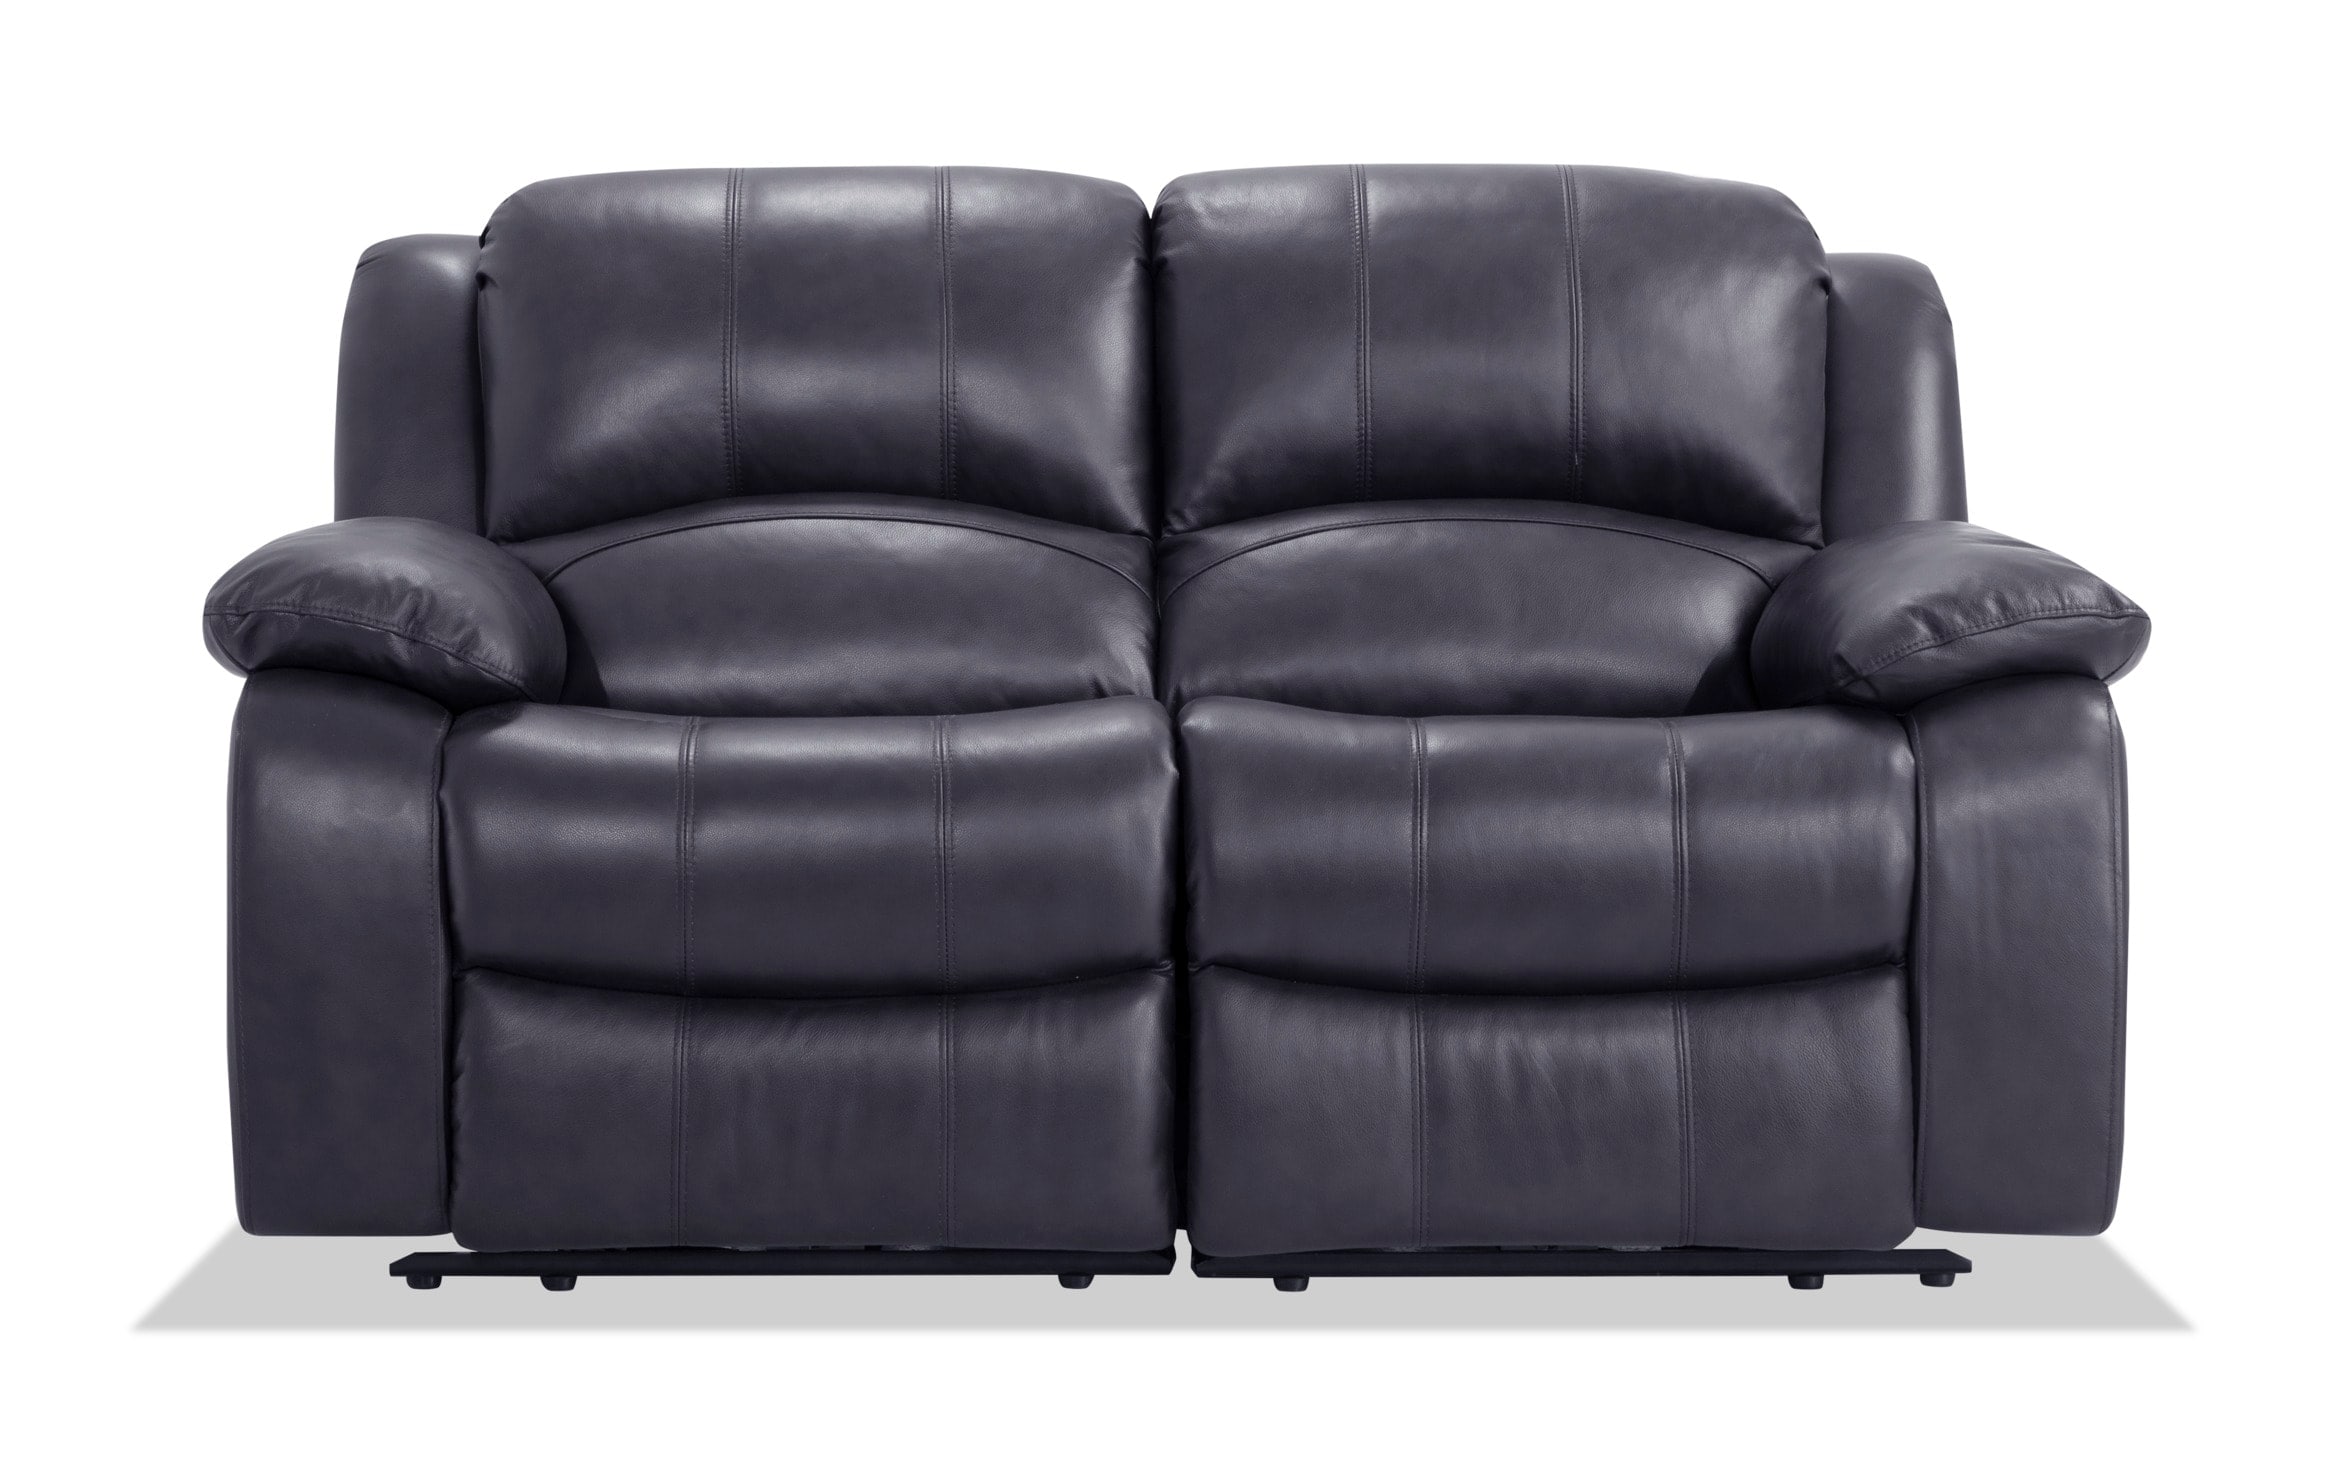 Olympus Gray Leather Power Reclining, Recliner Loveseat Leather